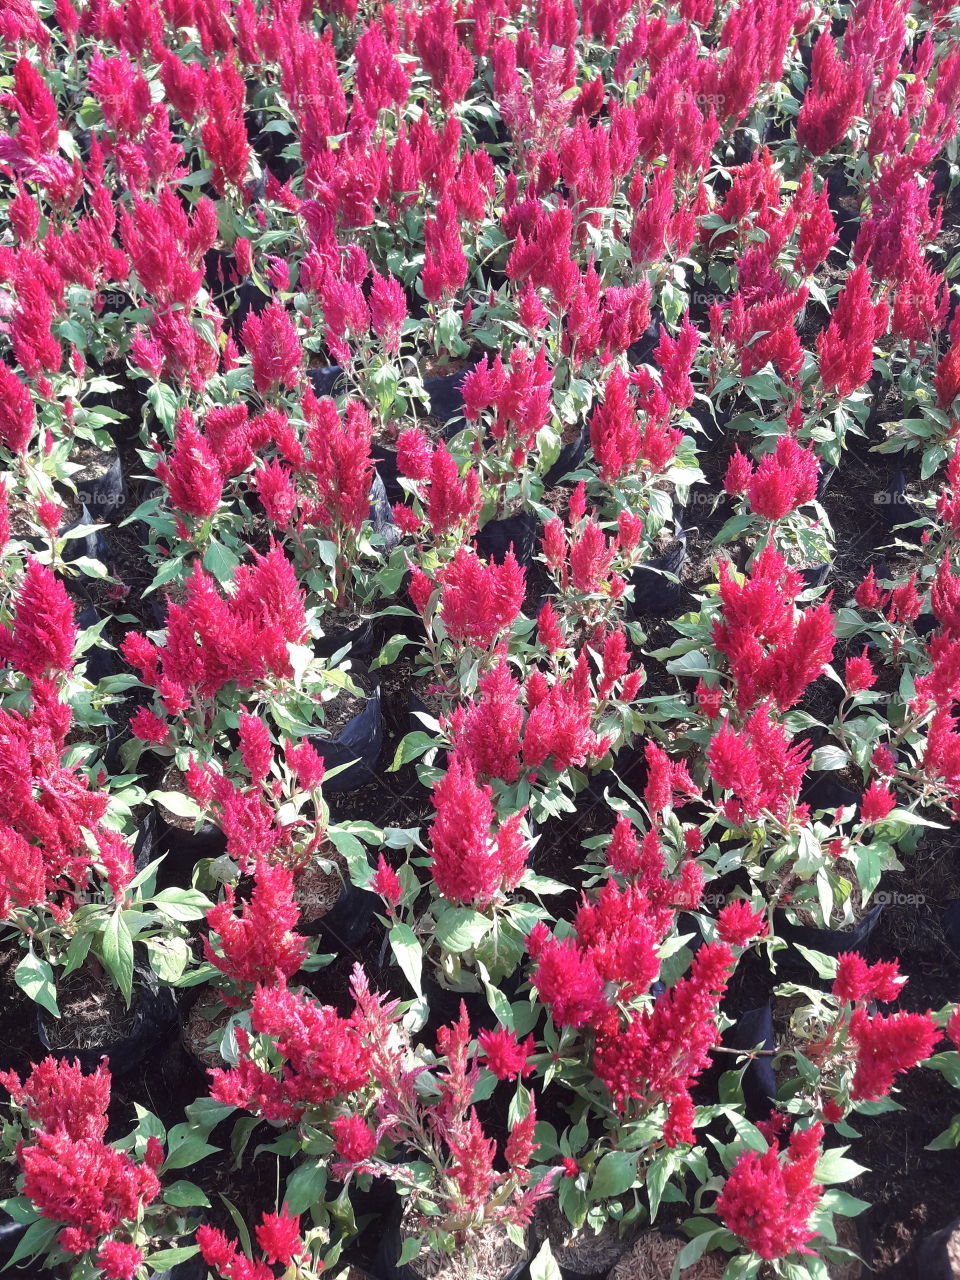 the field of red cockscomb flowers.